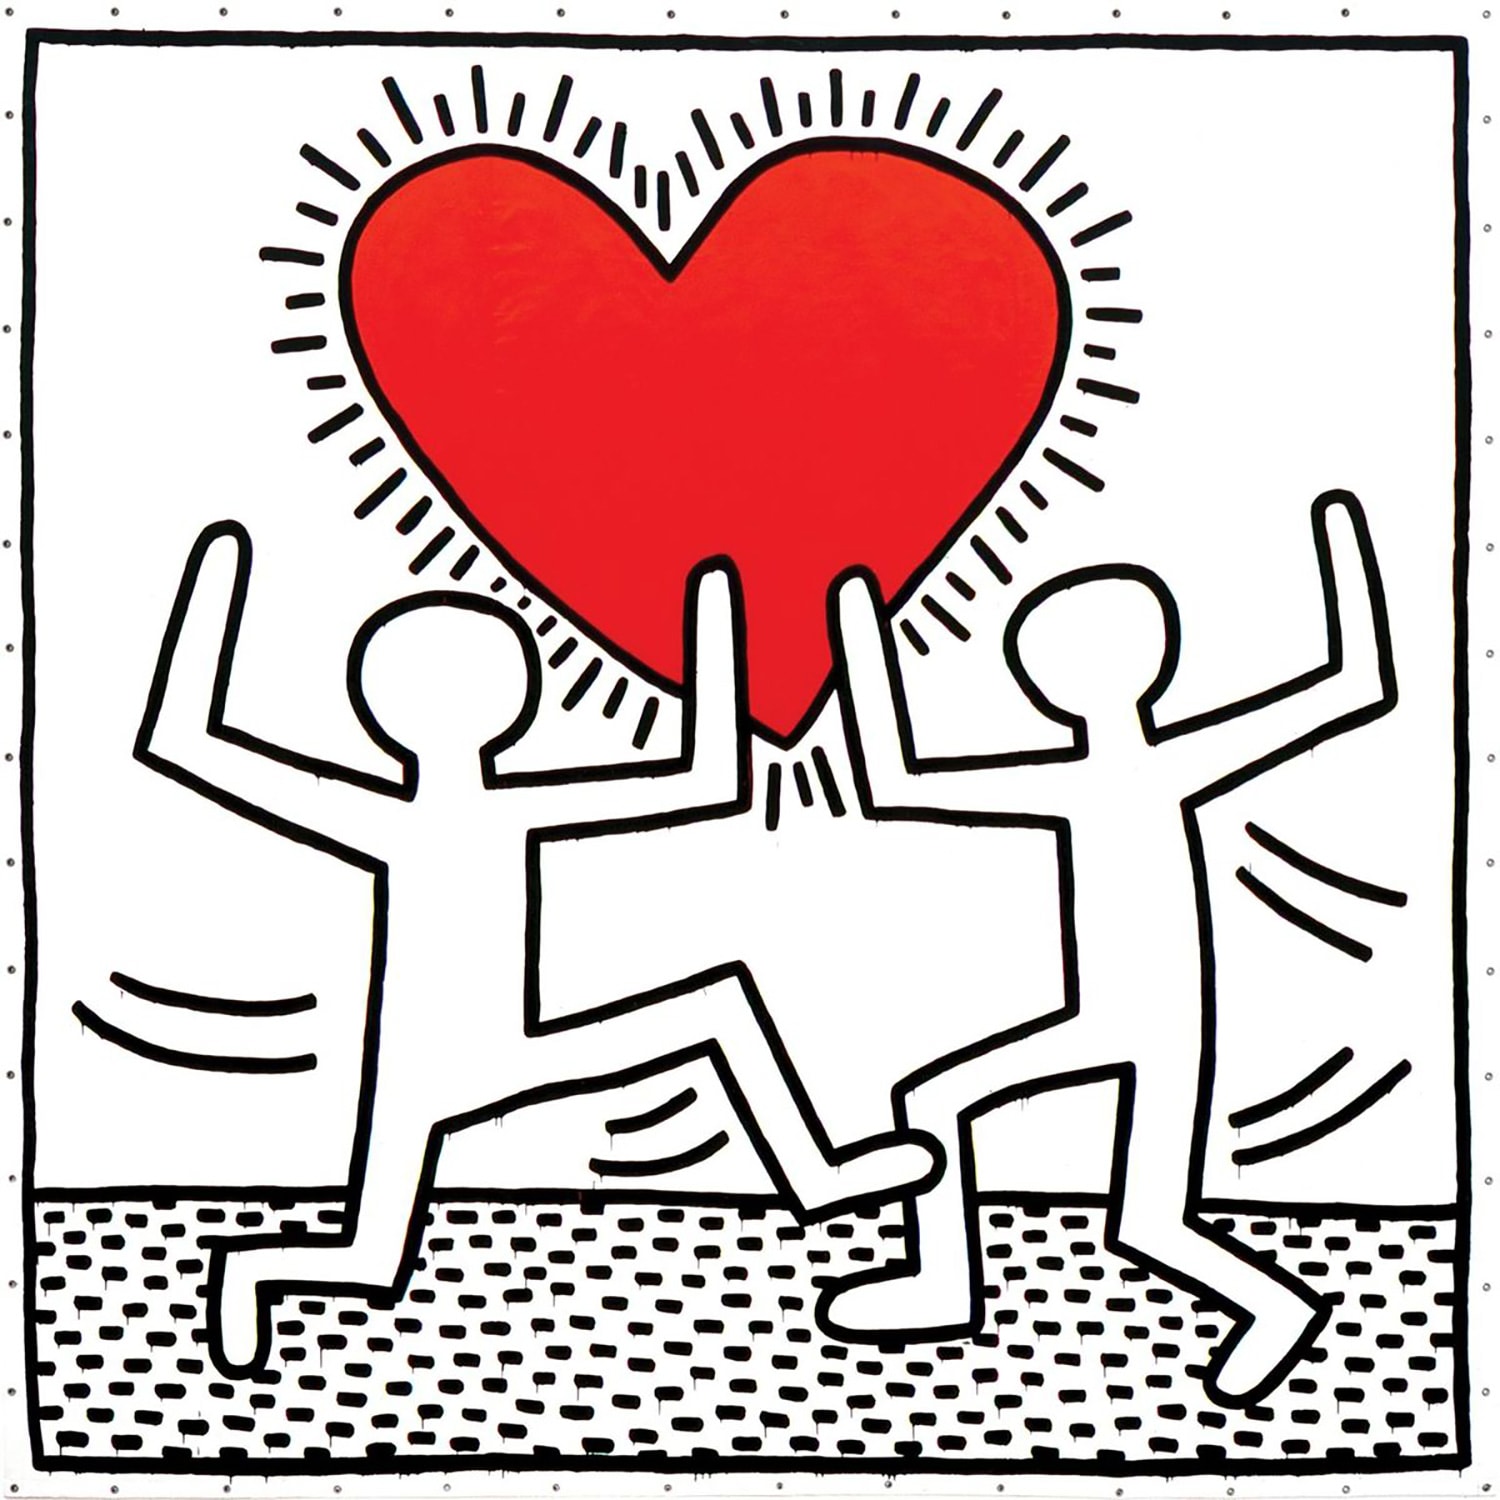 Keith Haring, Untitled, 1982. Acrylic on vinyl tarpaulin, 180 x 180 in. (4570 x 4570 cm), acquired in 1982. Courtesy of the Rubell Museum, Miami.